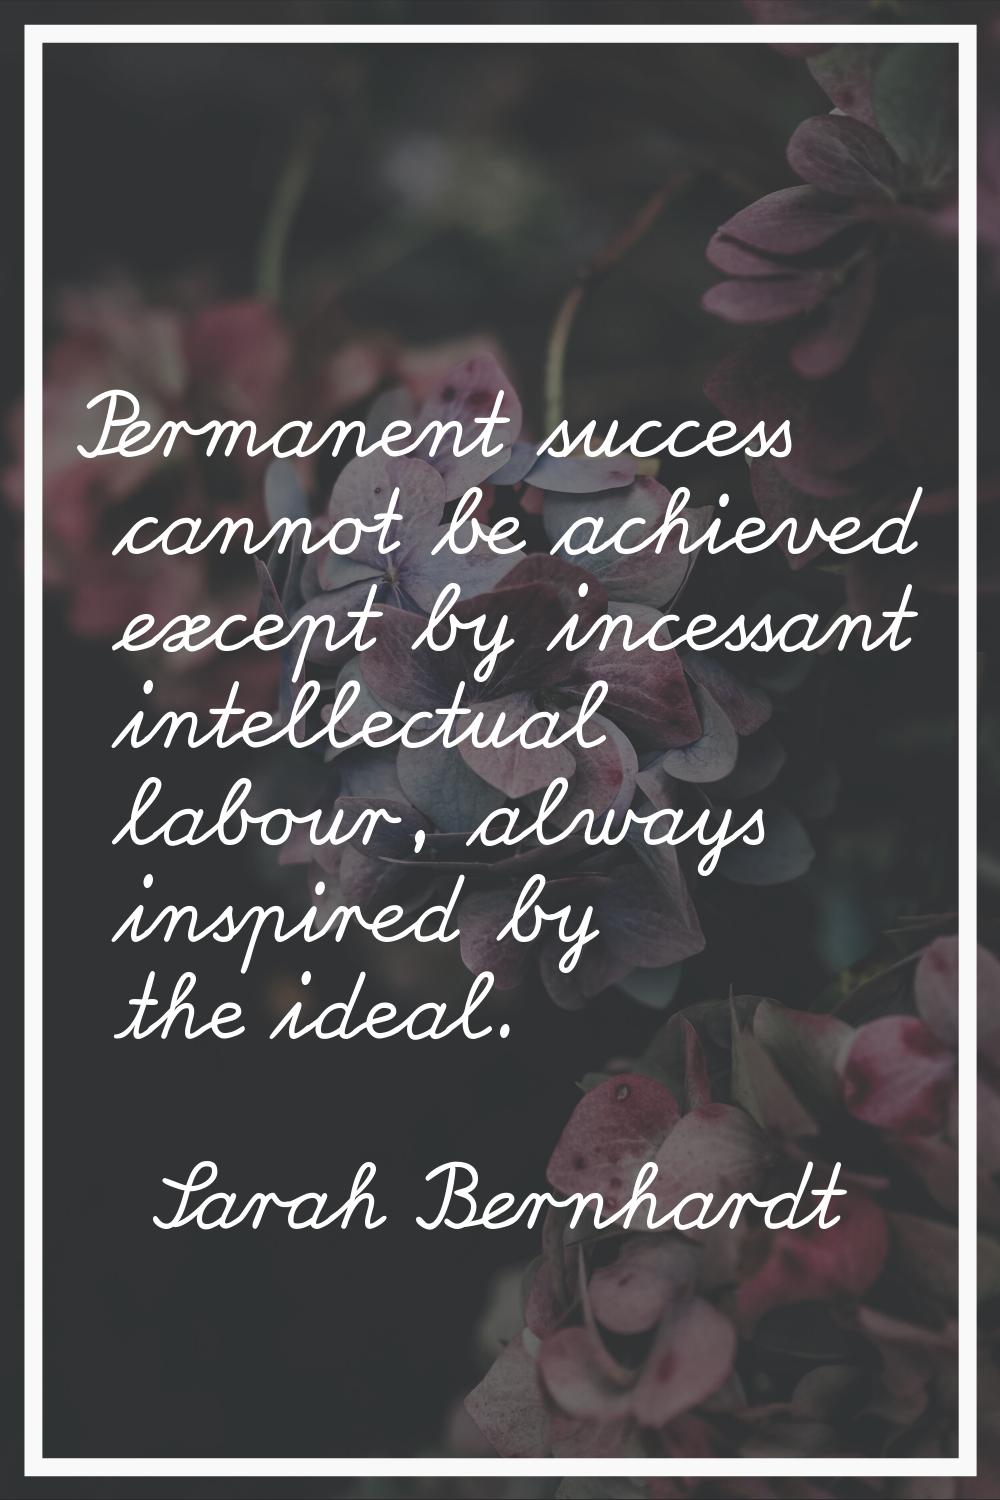 Permanent success cannot be achieved except by incessant intellectual labour, always inspired by th